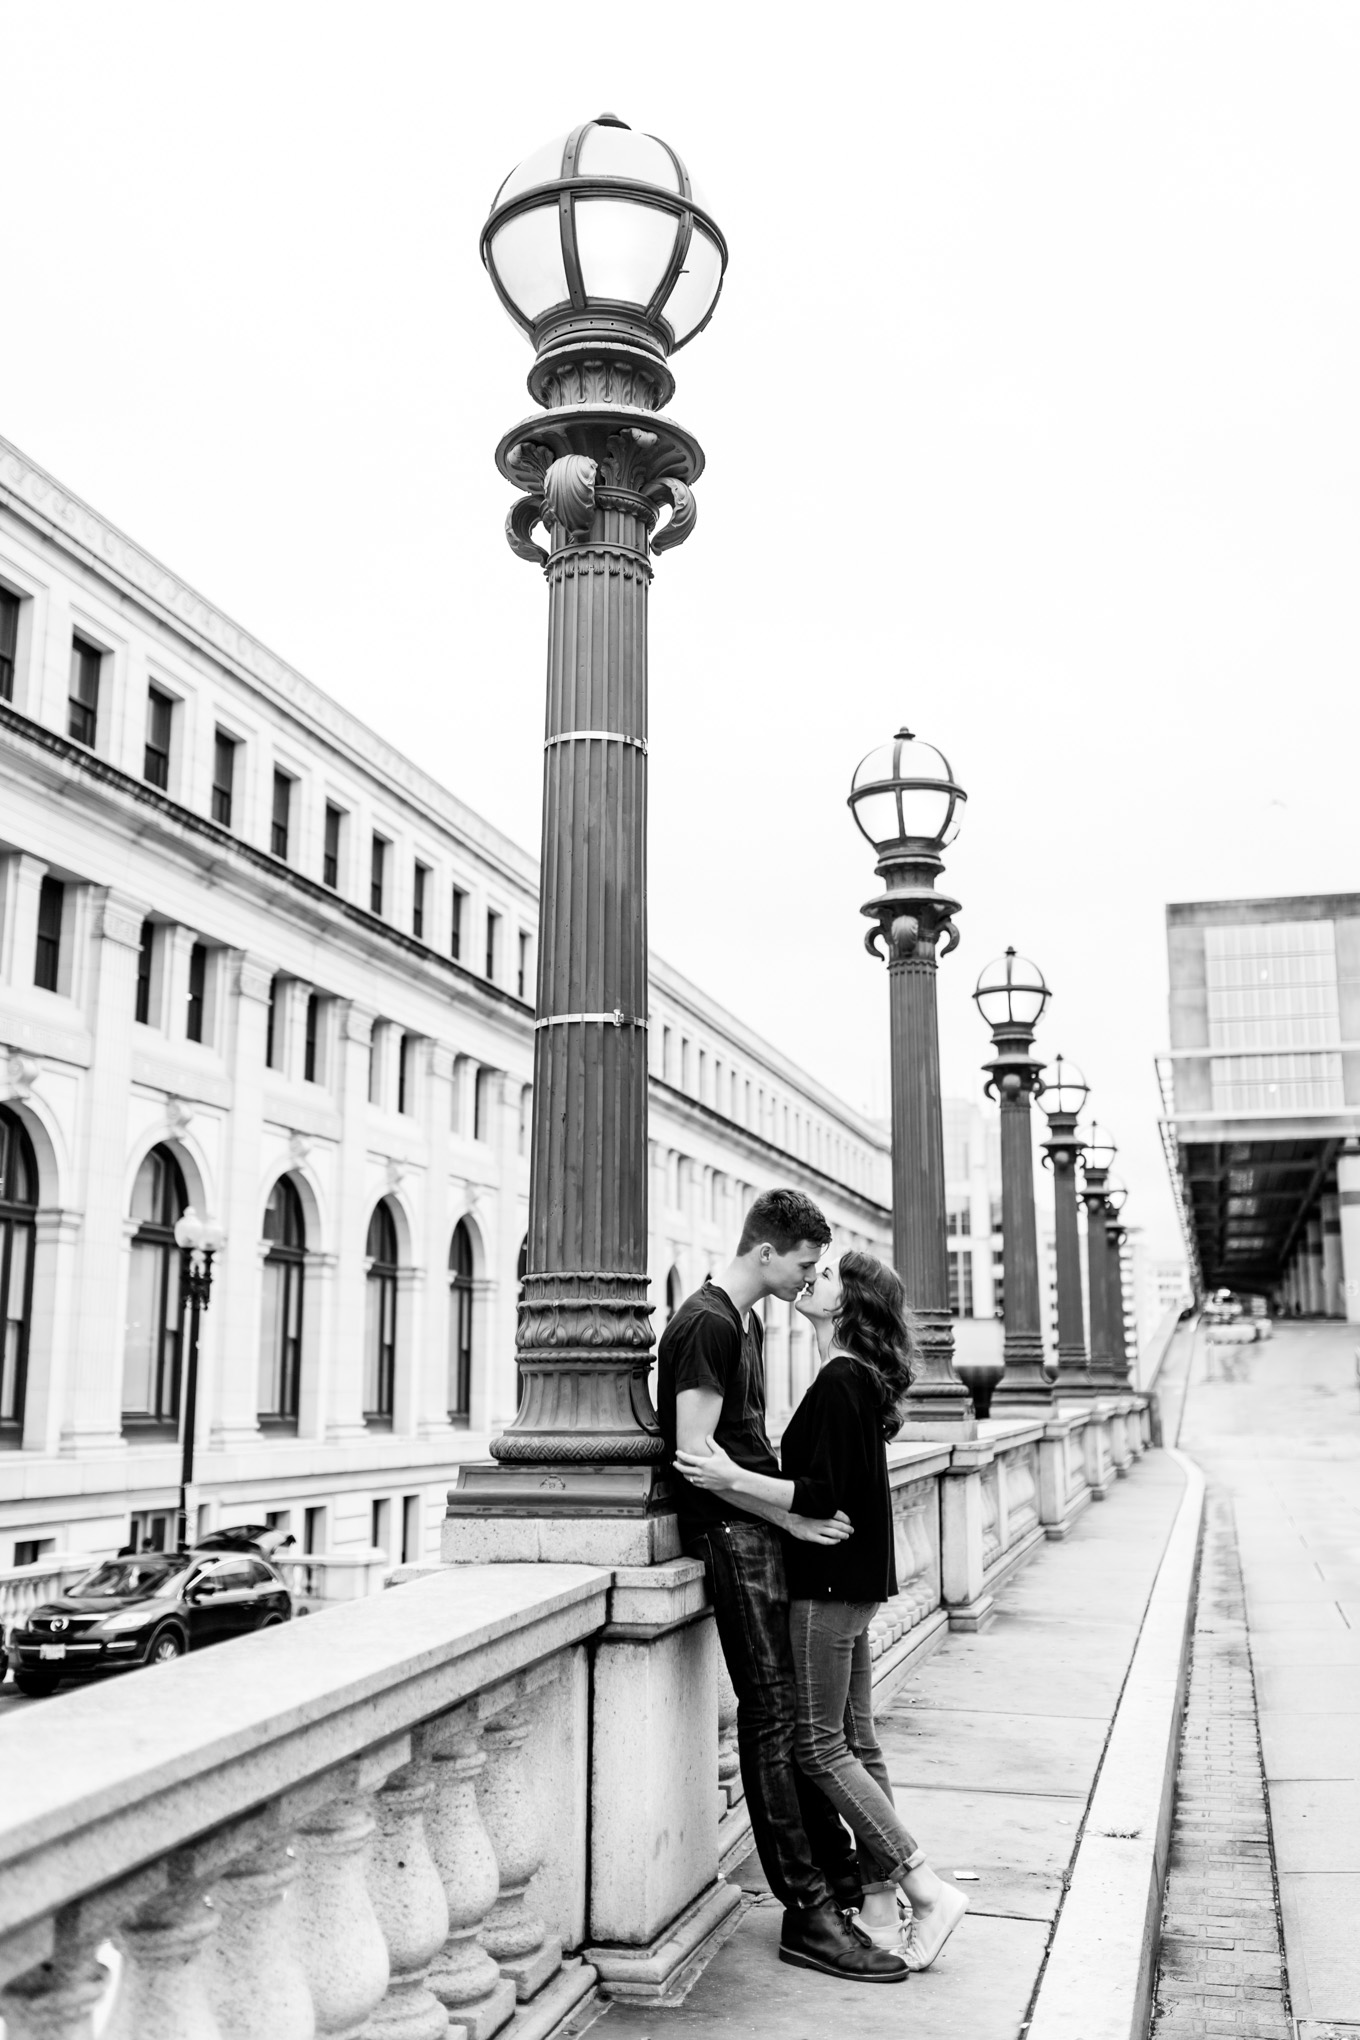 black and white engagement photos, black and white photography, black and white photos, engagement photos, black and white D.C., D.C. engagement photos, classic engagement photos, traditional engagement photos, engagement photos poses, classic architecture, D.C. architecture, Union Station D.C., Union Station, engaged couple, relationship goals, joyful couple, black and white sessions, couple leaning on lamp post, Postal Museum